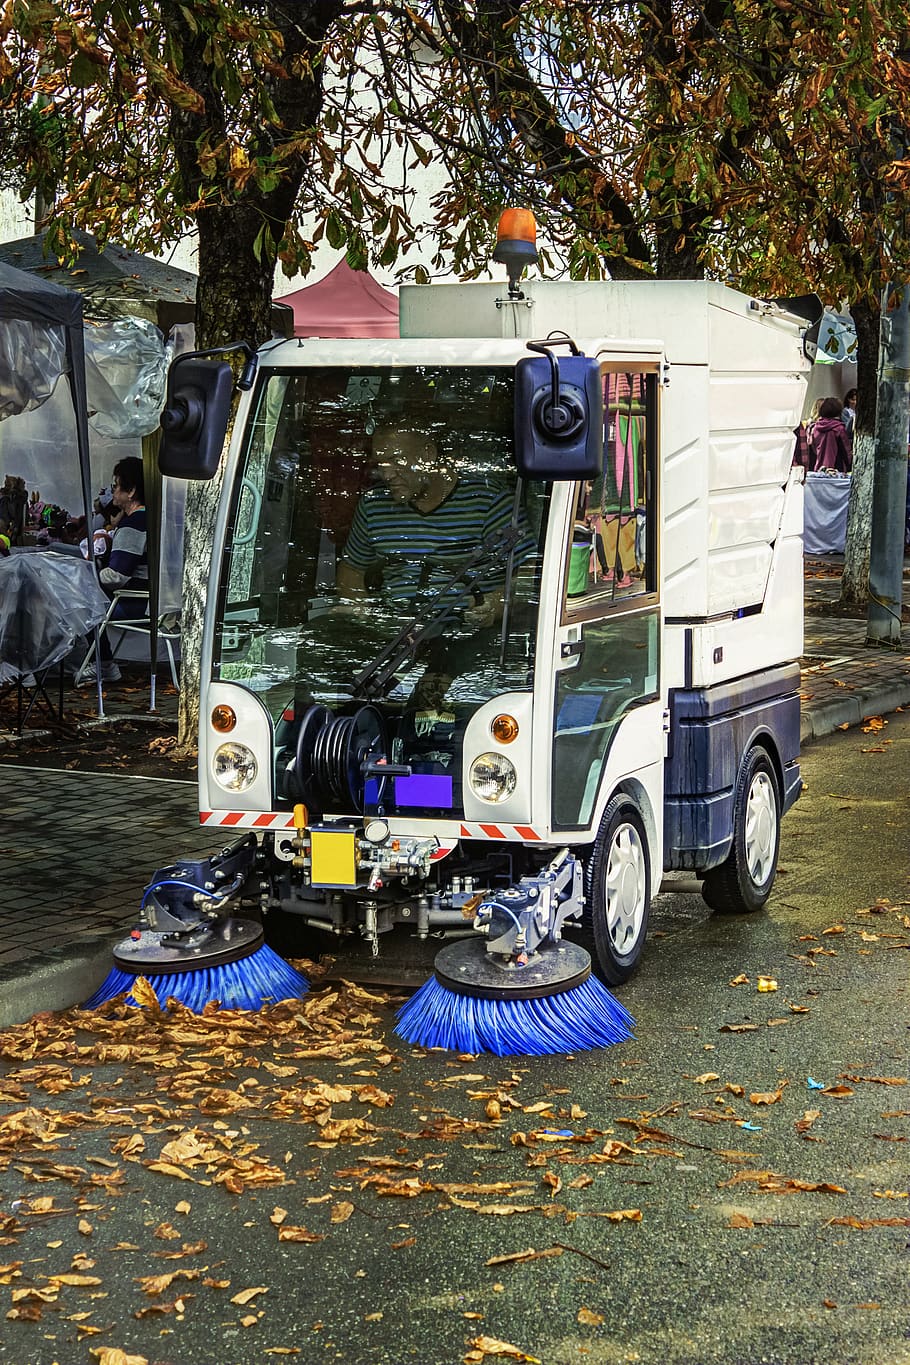 road sweeper, street cleaning, cleaning, clean, sweeper, municipal engineering, pavement, cleaner, periodic brush, sweep